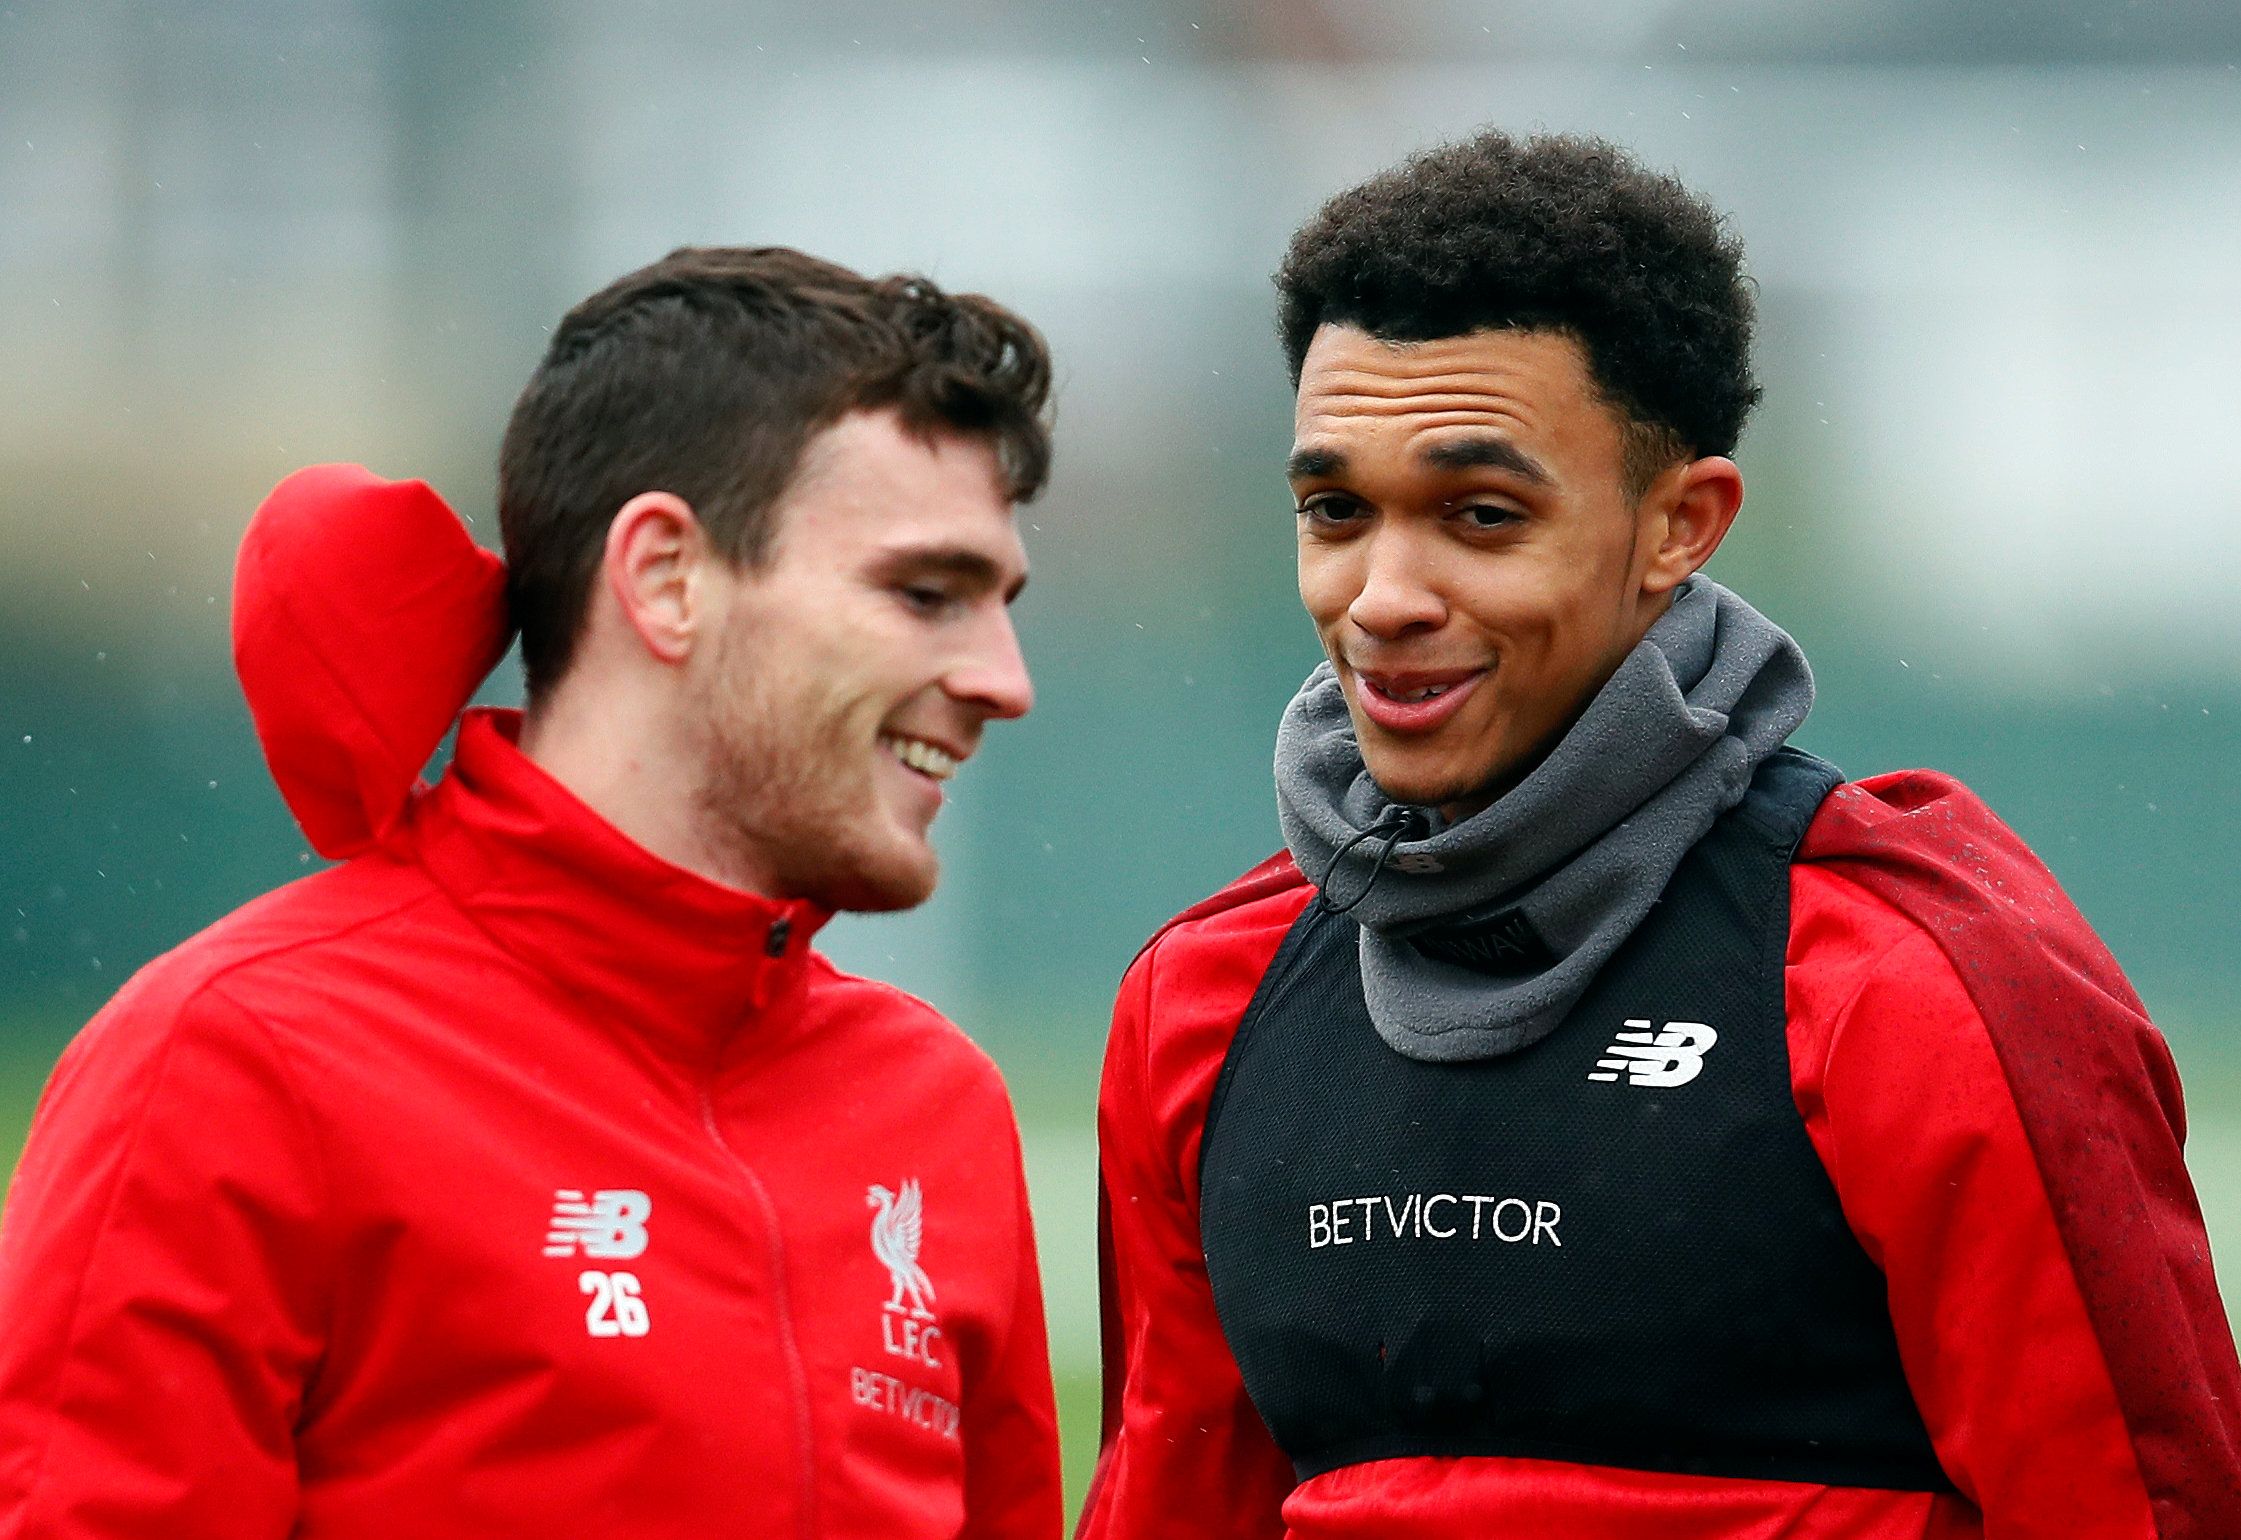 Soccer Football - Champions League - Liverpool Training - Melwood, Liverpool, Britain - November 27, 2018   Liverpool's Andrew Robertson and Trent Alexander-Arnold during training     Action Images via Reuters/Jason Cairnduff